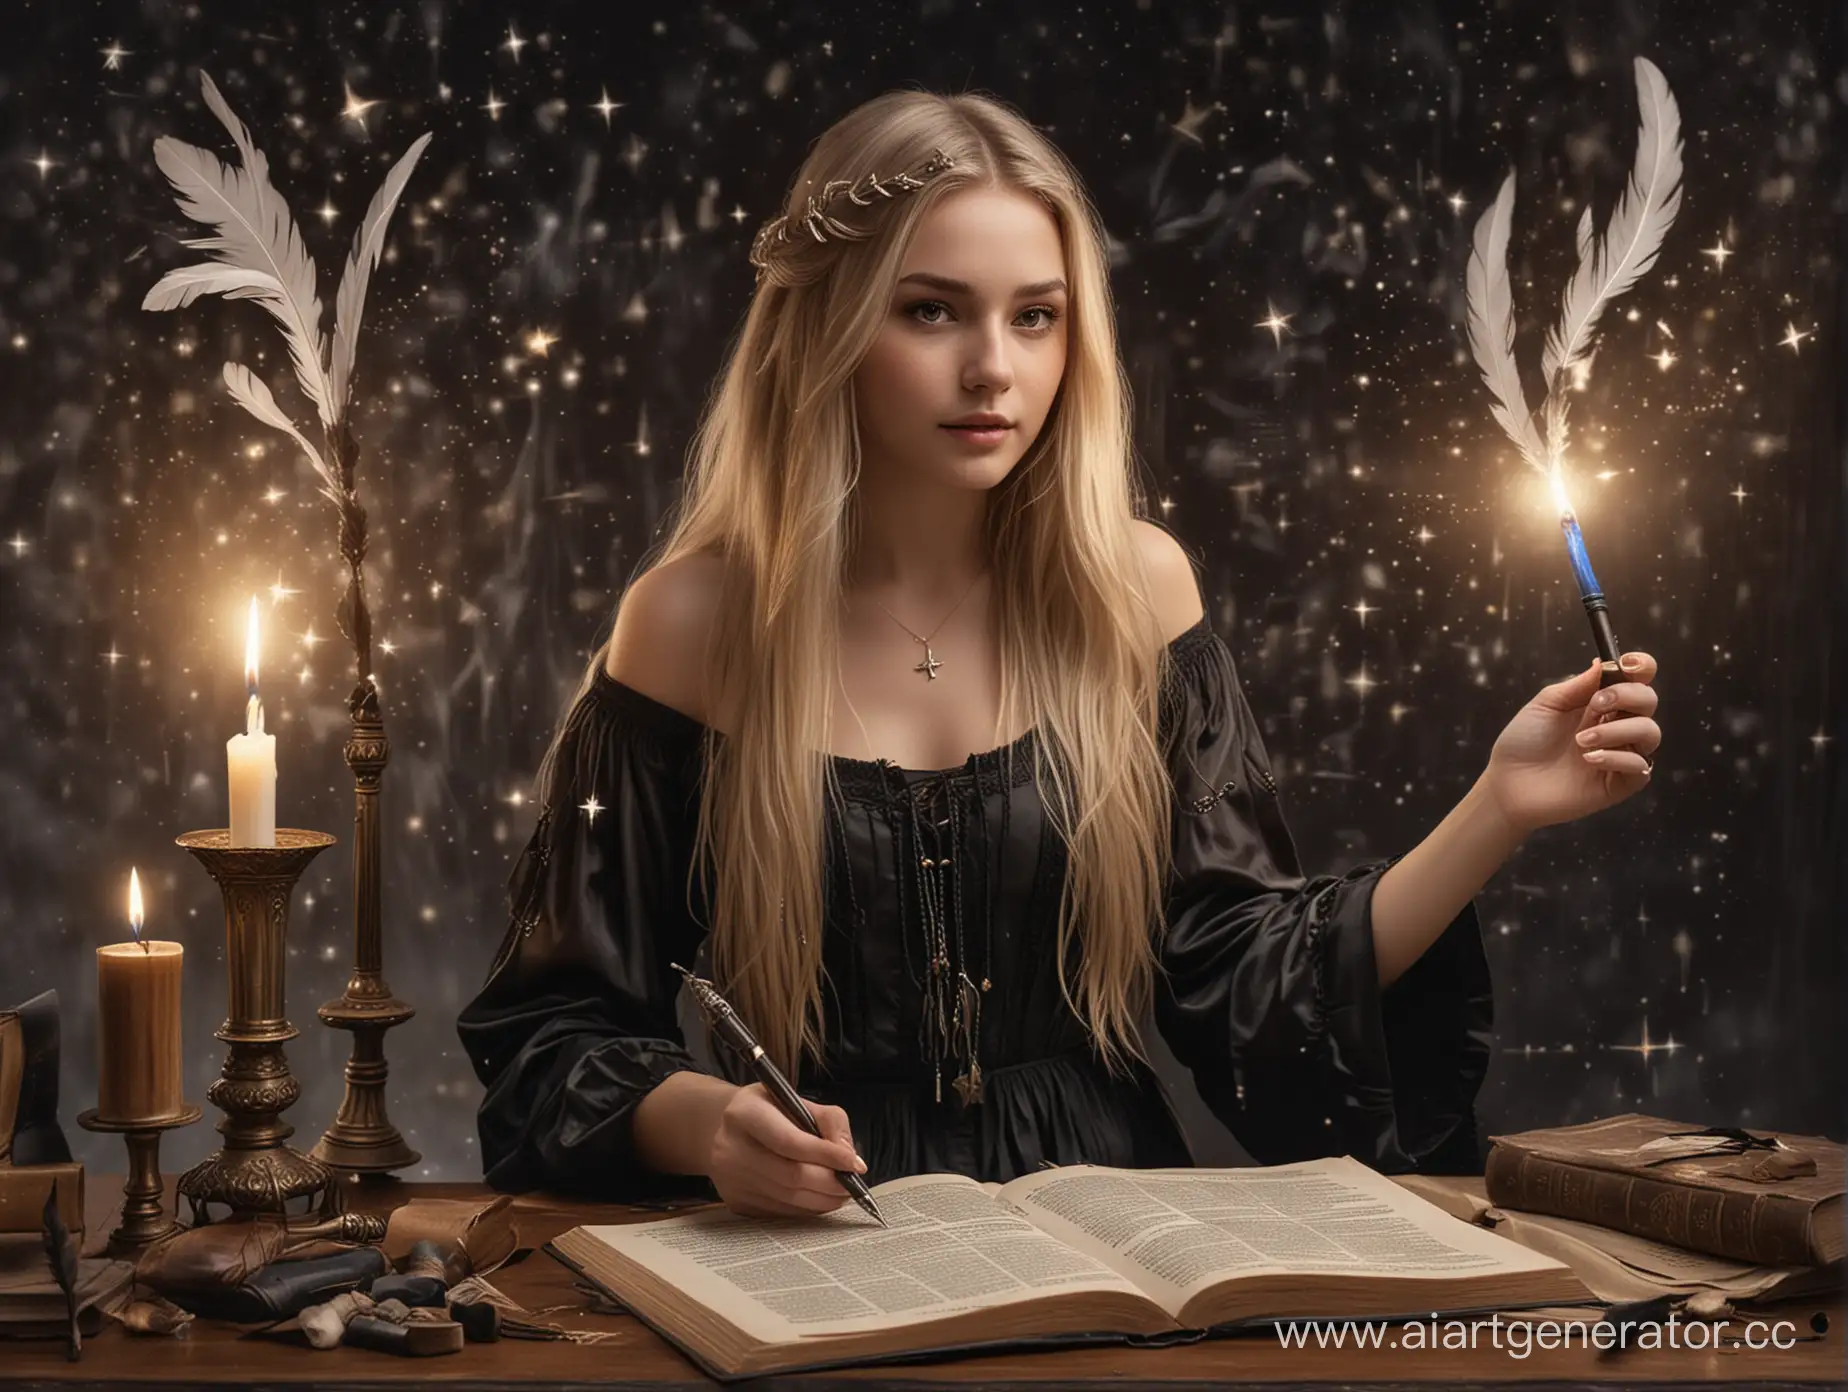 Mystical-Scholar-Holding-Illuminated-Books-with-Floating-Quill-Pen